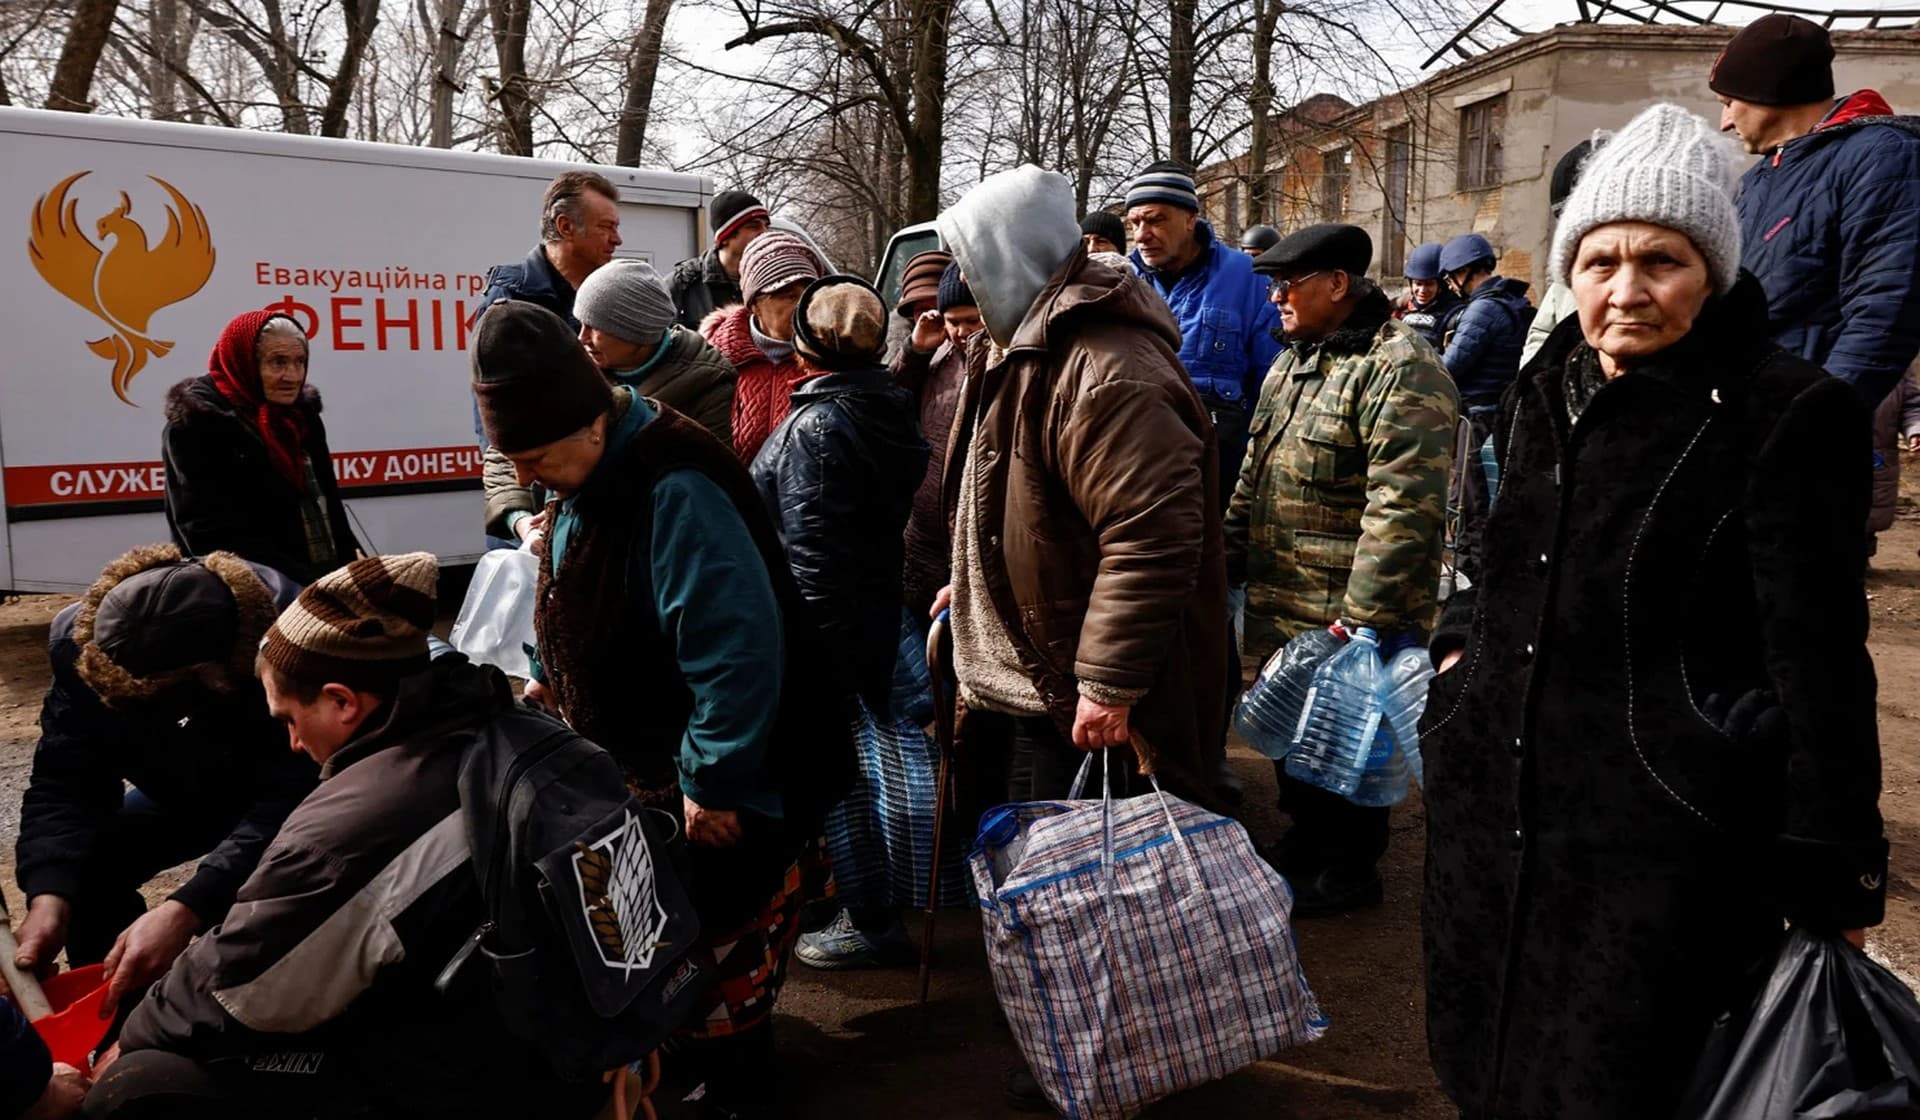 Residents line up to receive food and fill up bottles with fresh drinking water brought in to a neighbourhood near the frontline after critical civil infrastructure was hit in Chasiv Yar